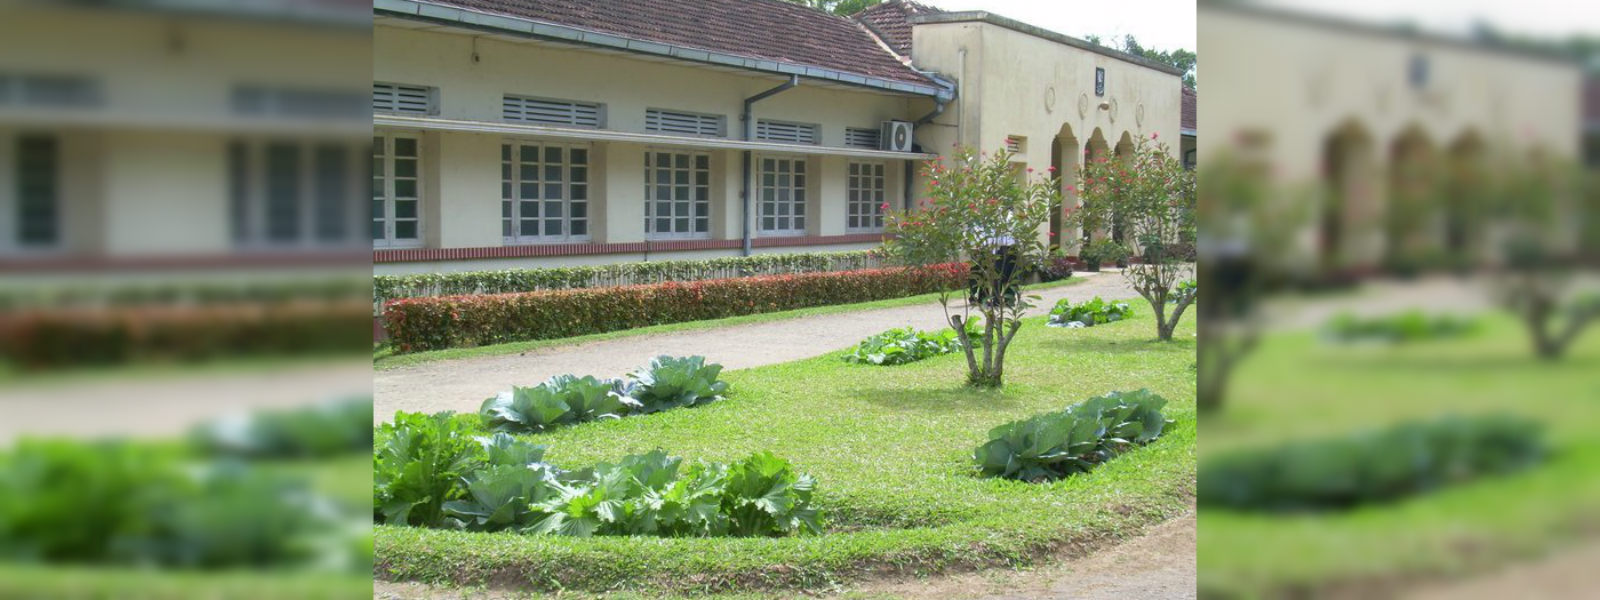 Kundasale Agri school closed due to viral outbreak